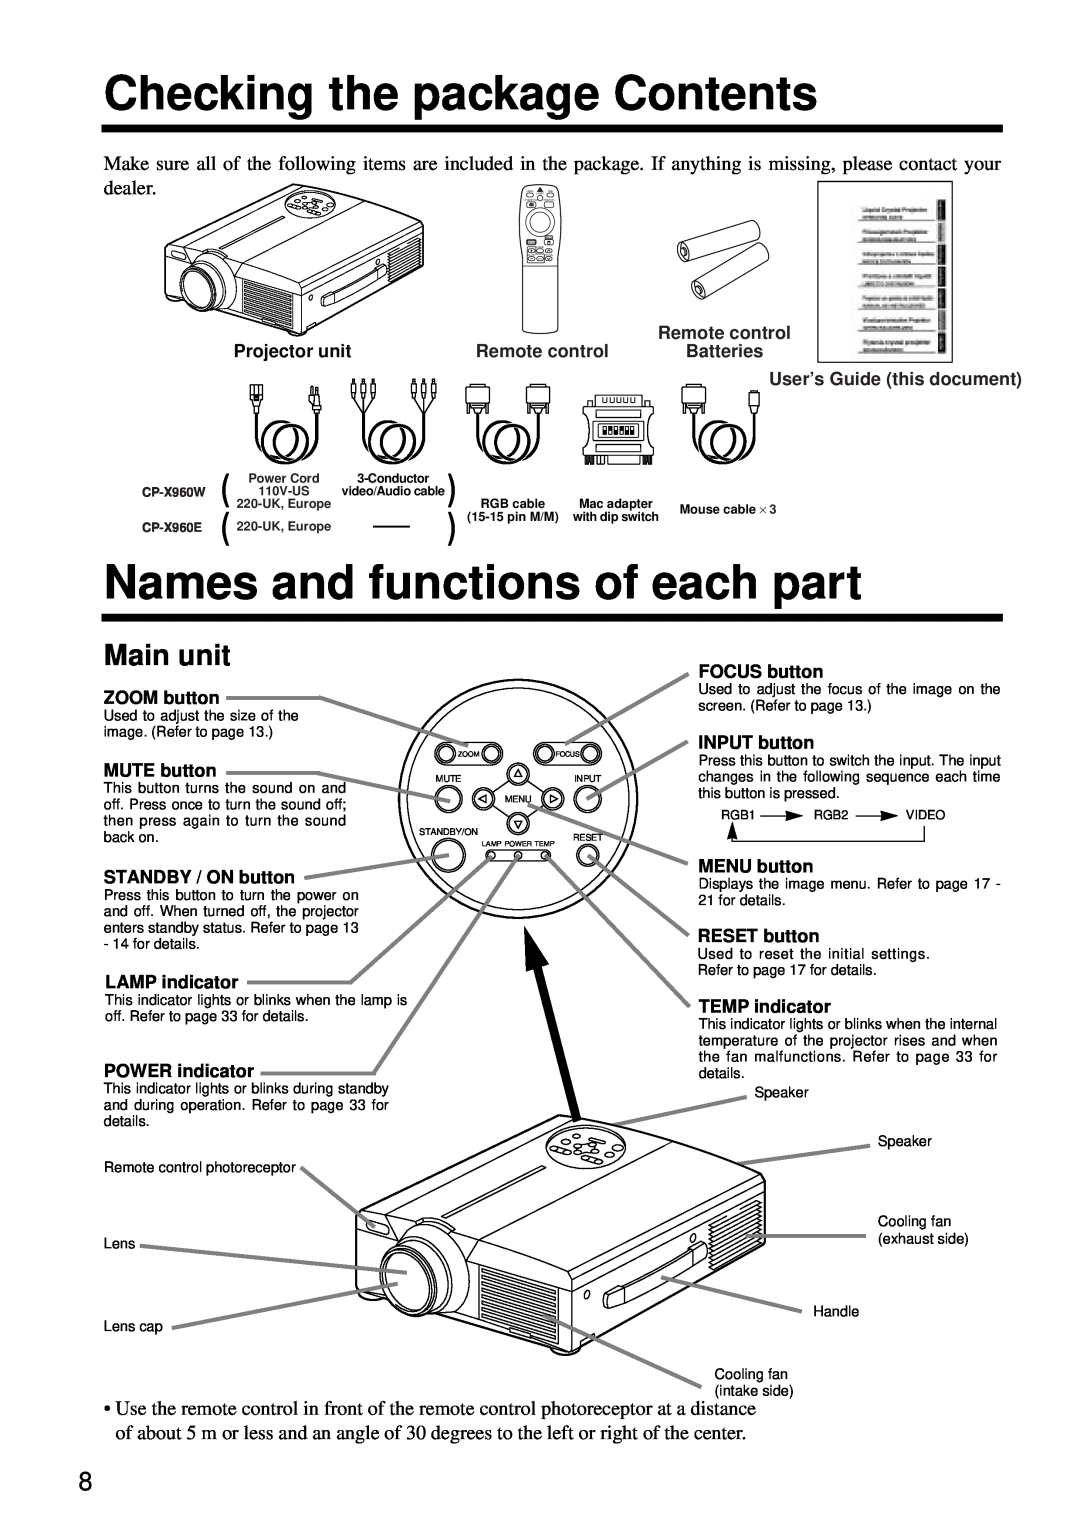 Hitachi CP-X960W user manual Checking the package Contents, Names and functions of each part, Main unit 